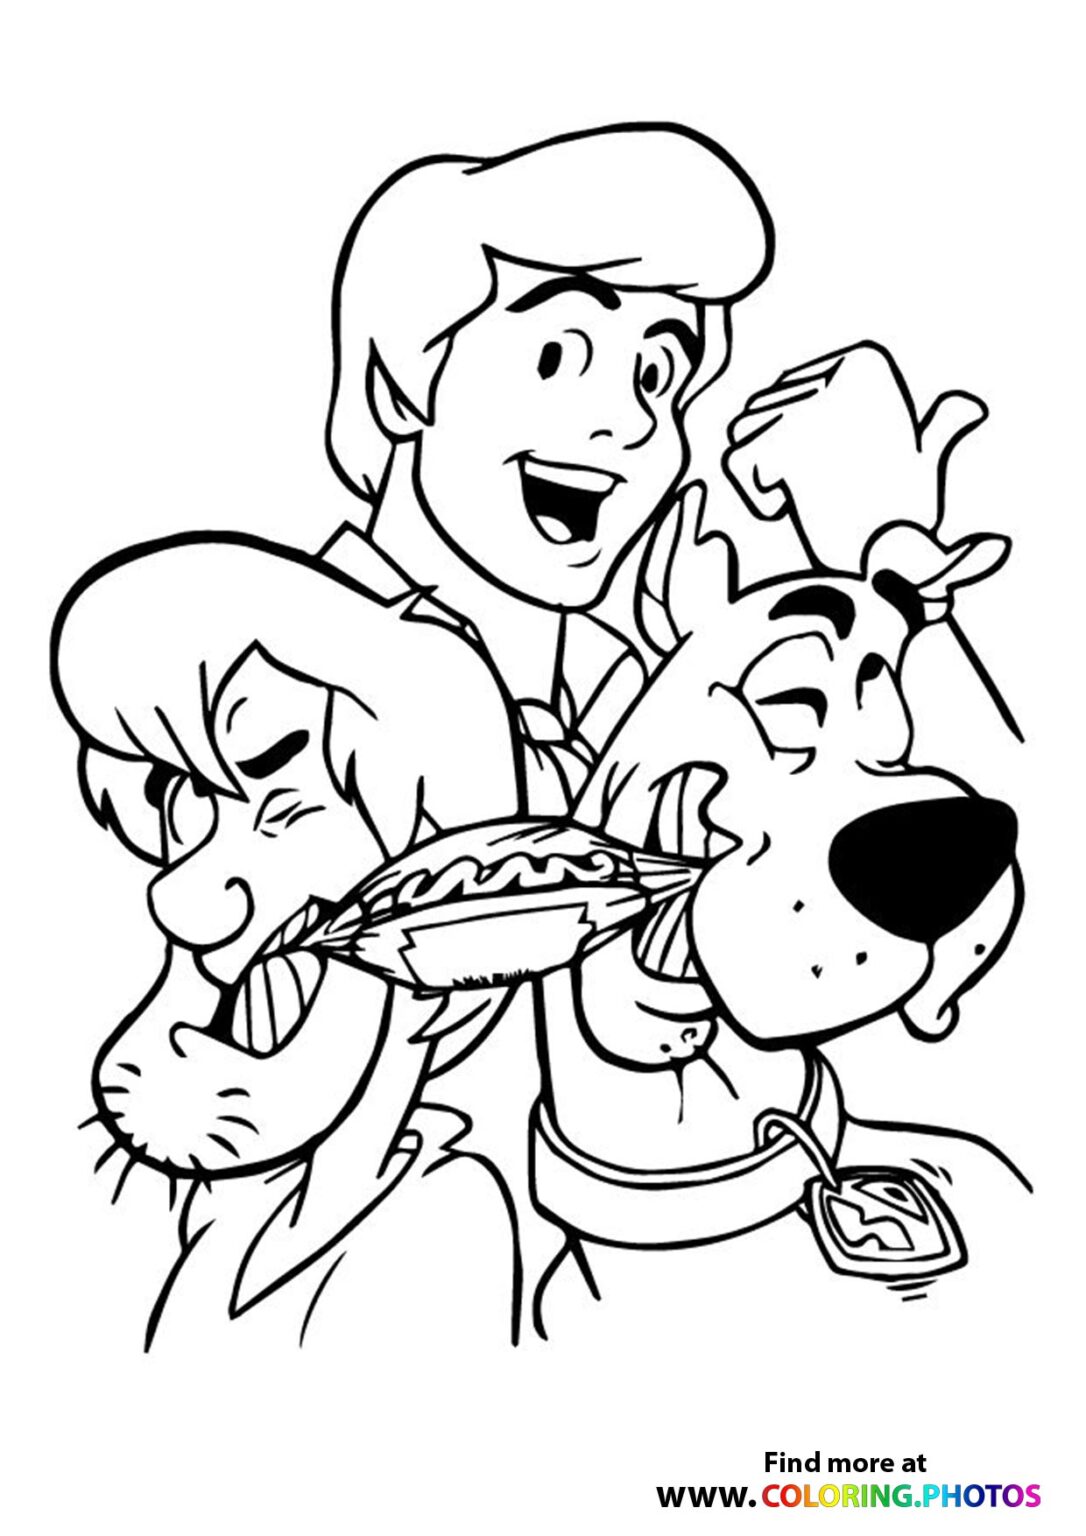 Scooby-Doo, Shaggy and Fred - Coloring Pages for kids